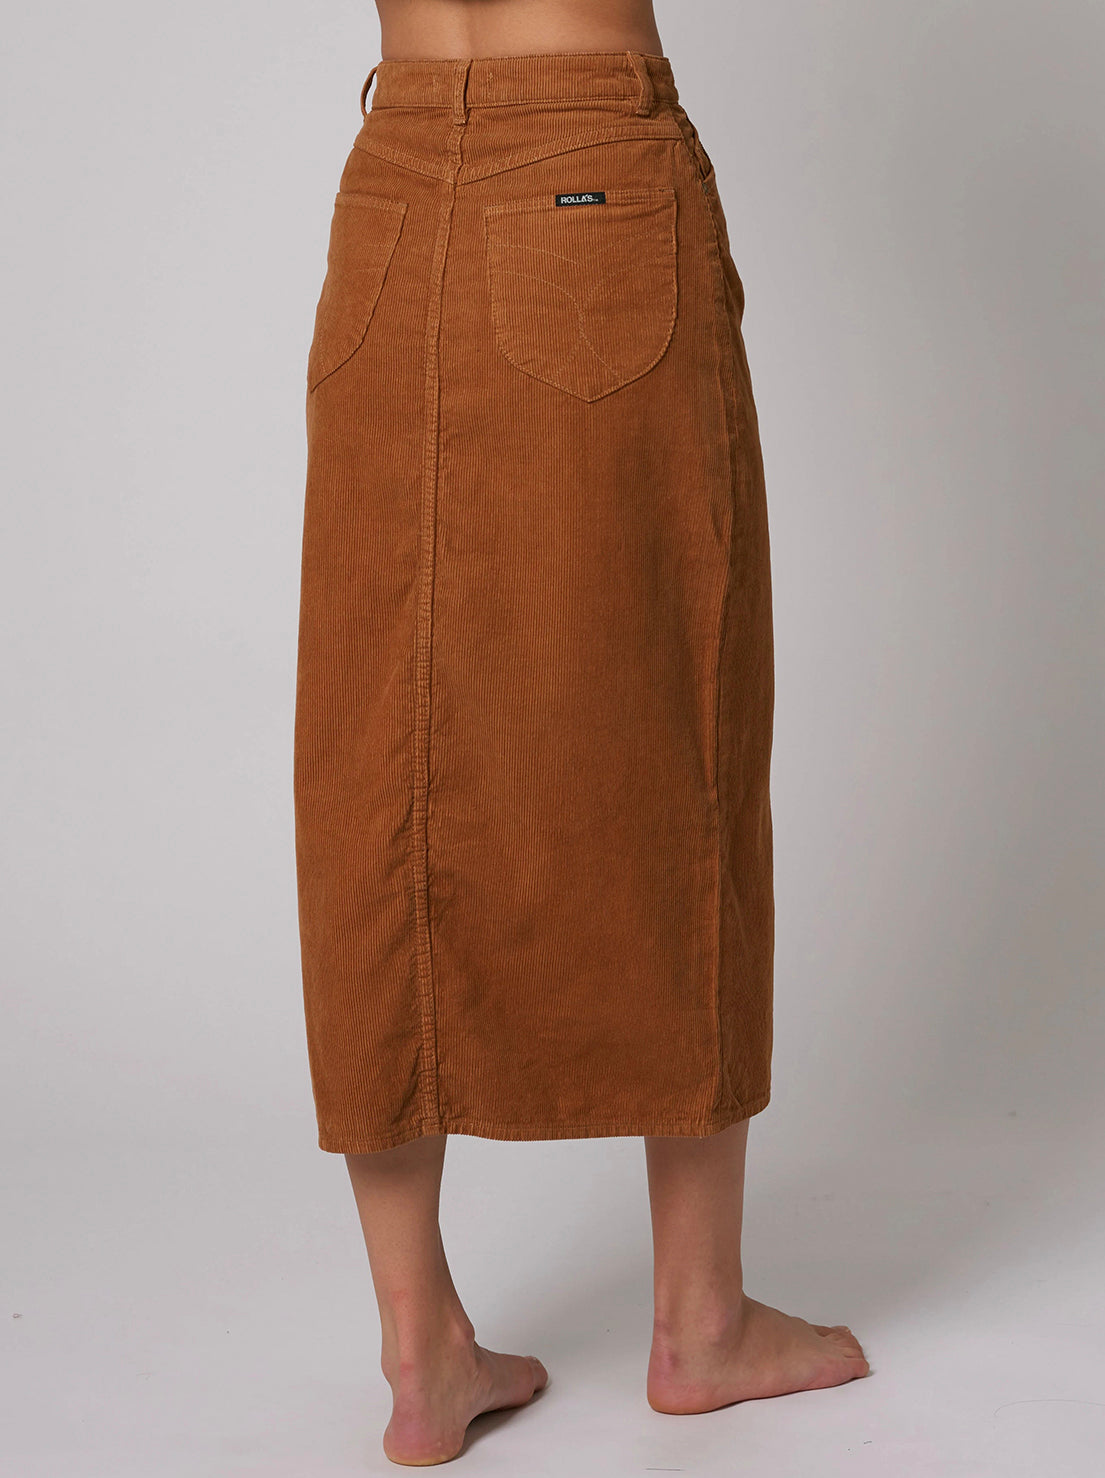 Rolla's - Chicago Skirt - Tan Cord